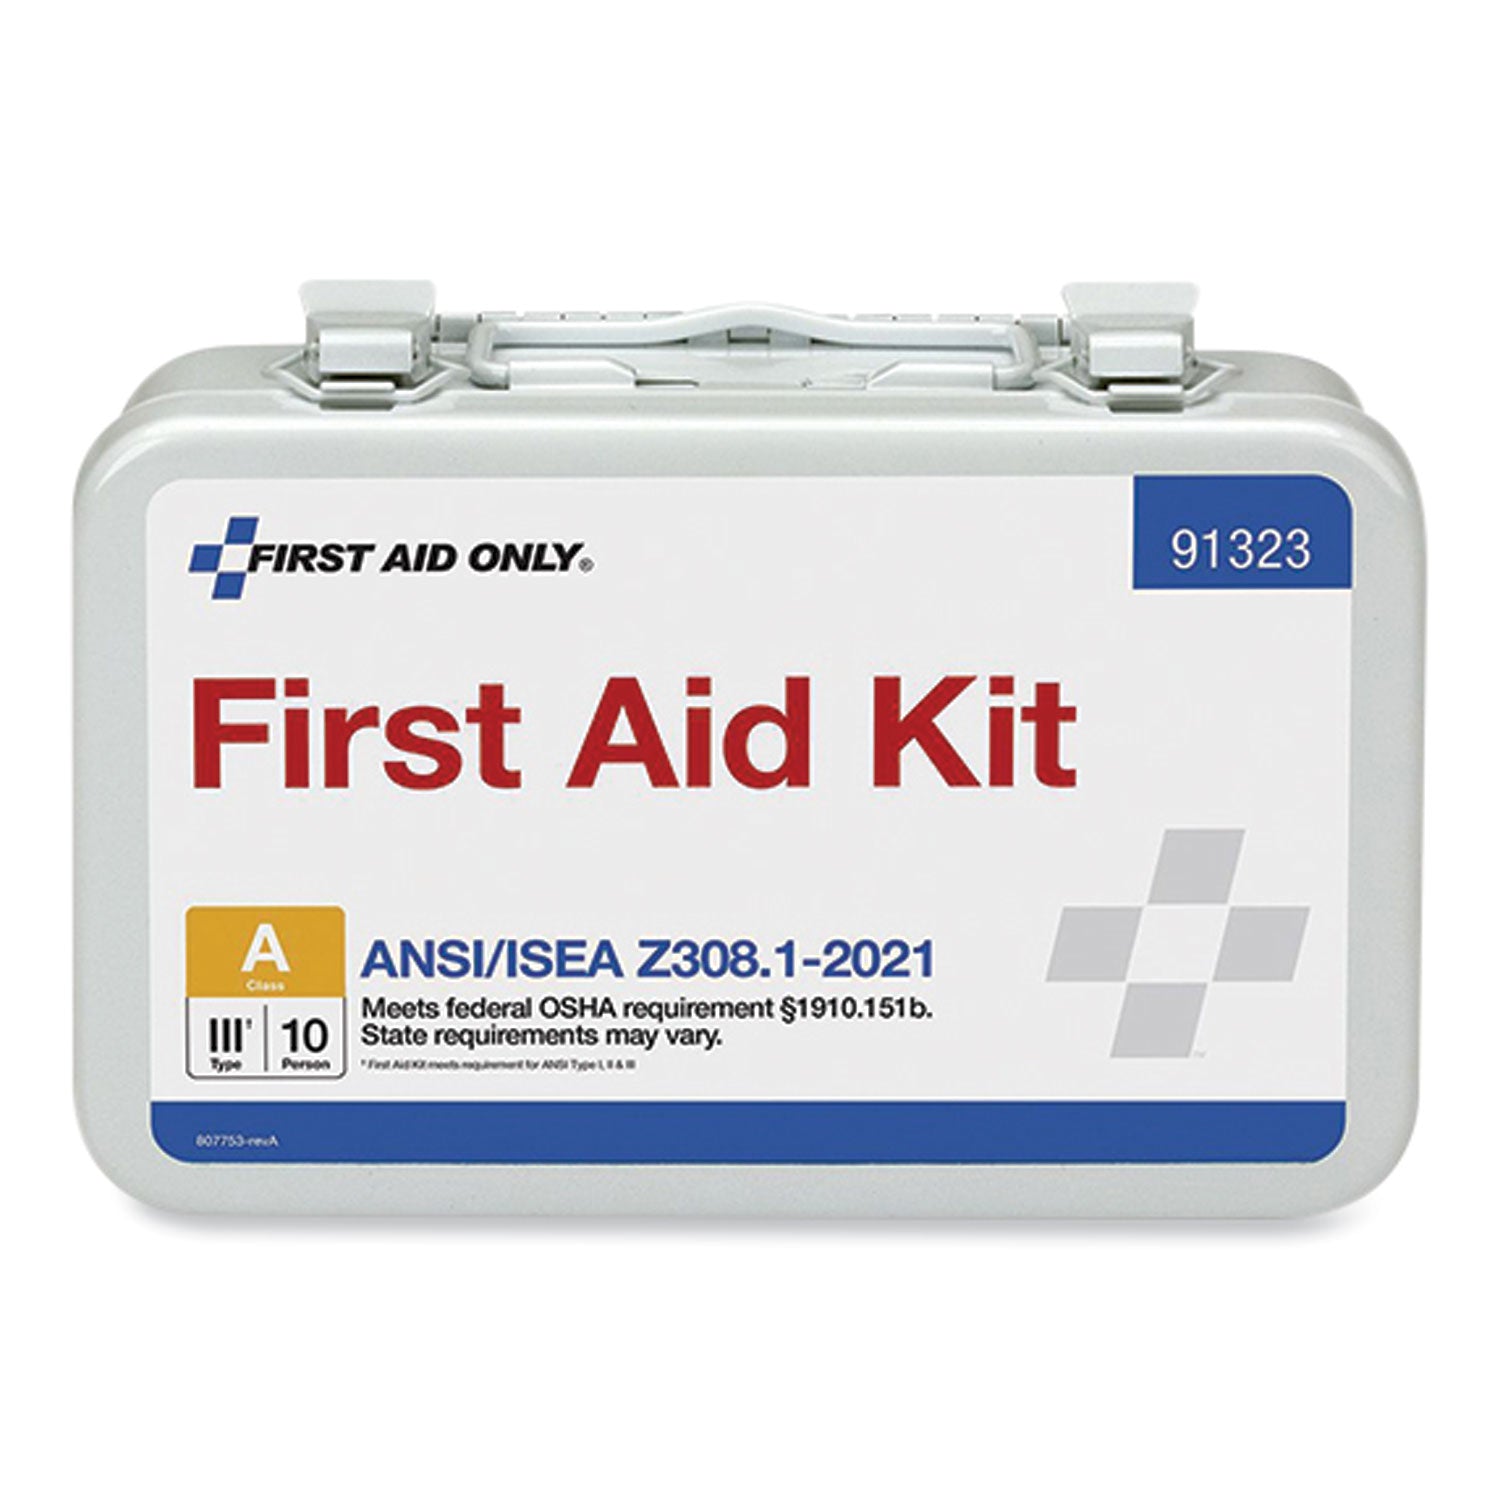 ansi-2021-first-aid-kit-for-10-people-76-pieces-metal-case_fao91323 - 1